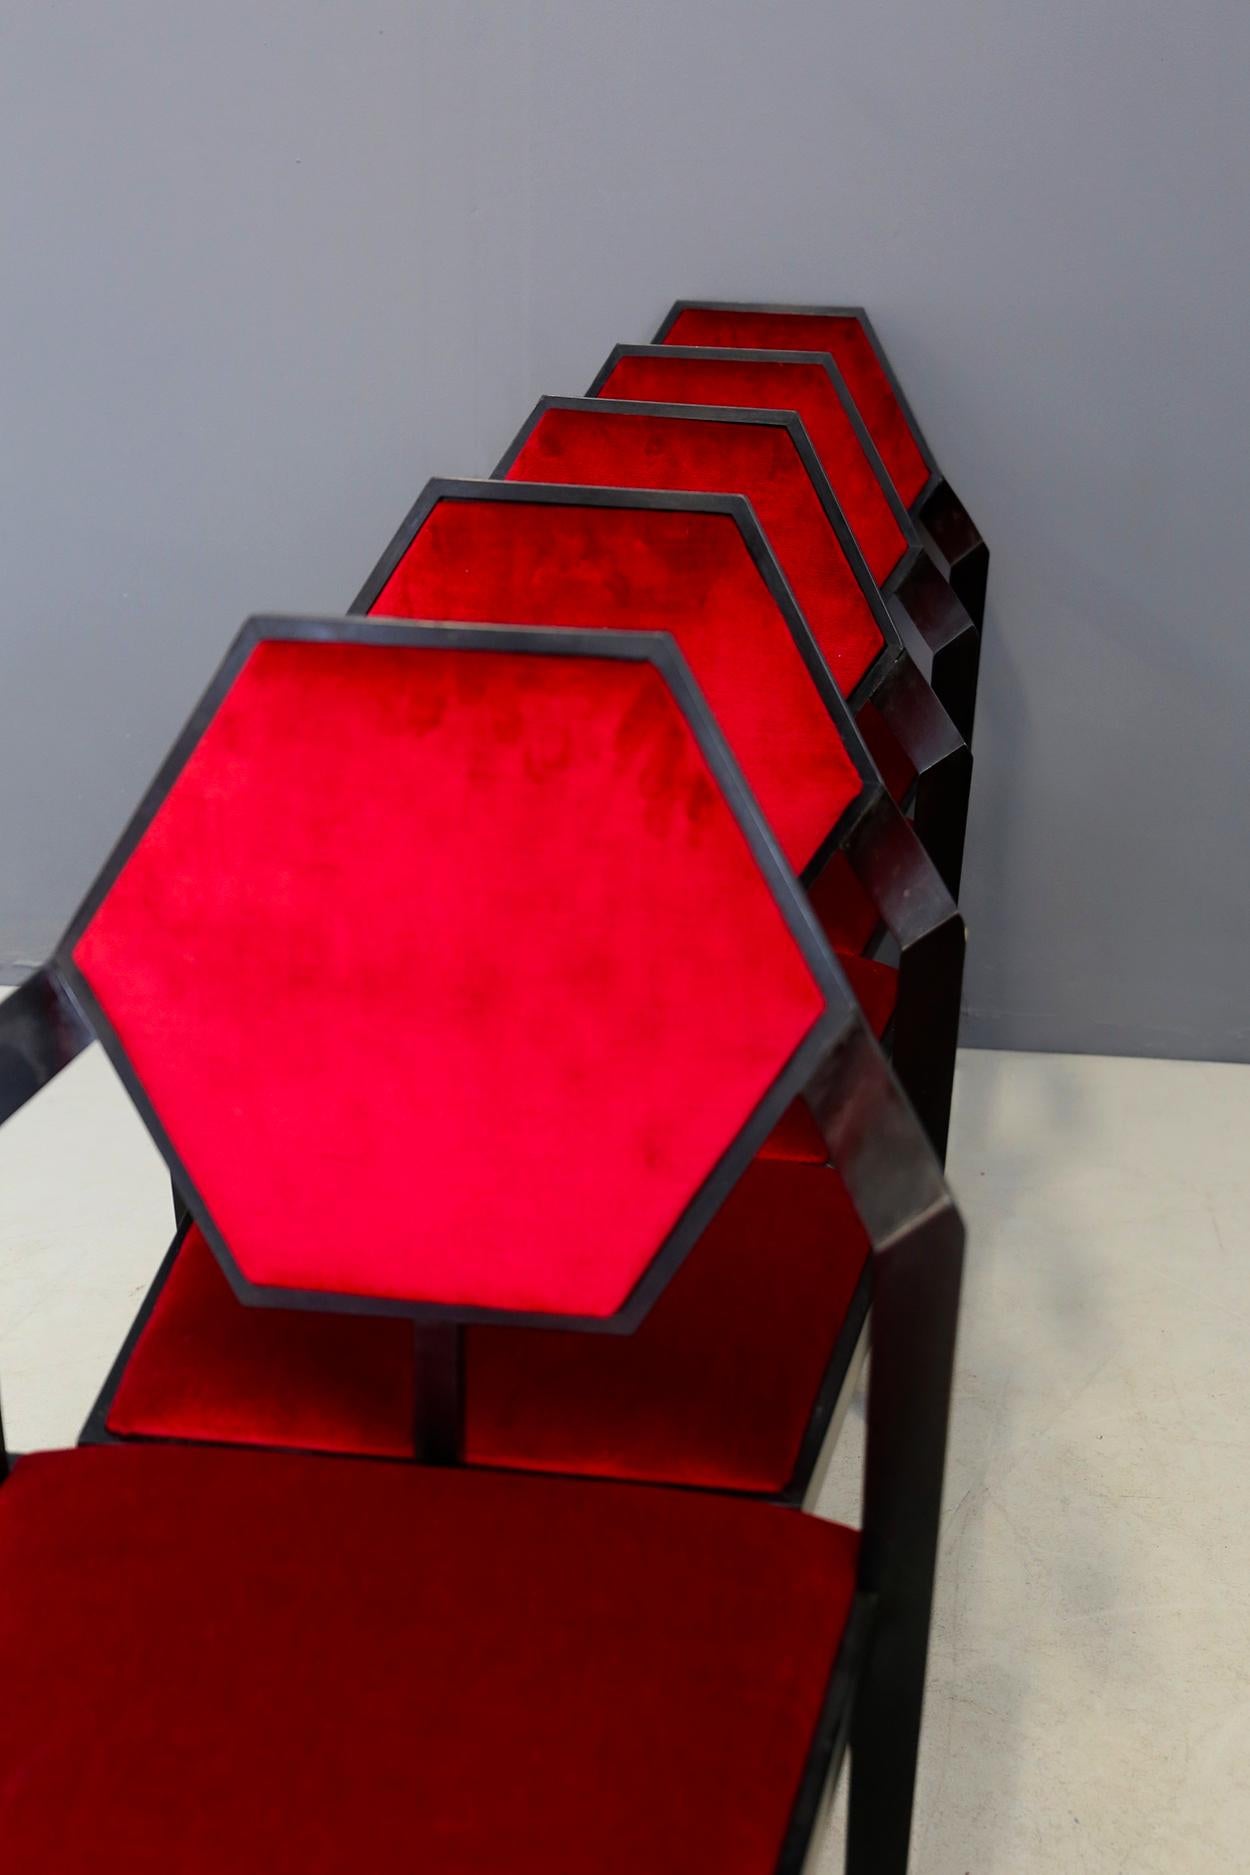 Velvet Set of Six Red Chairs Designed by Frank Lloyd Wright from the 1980s